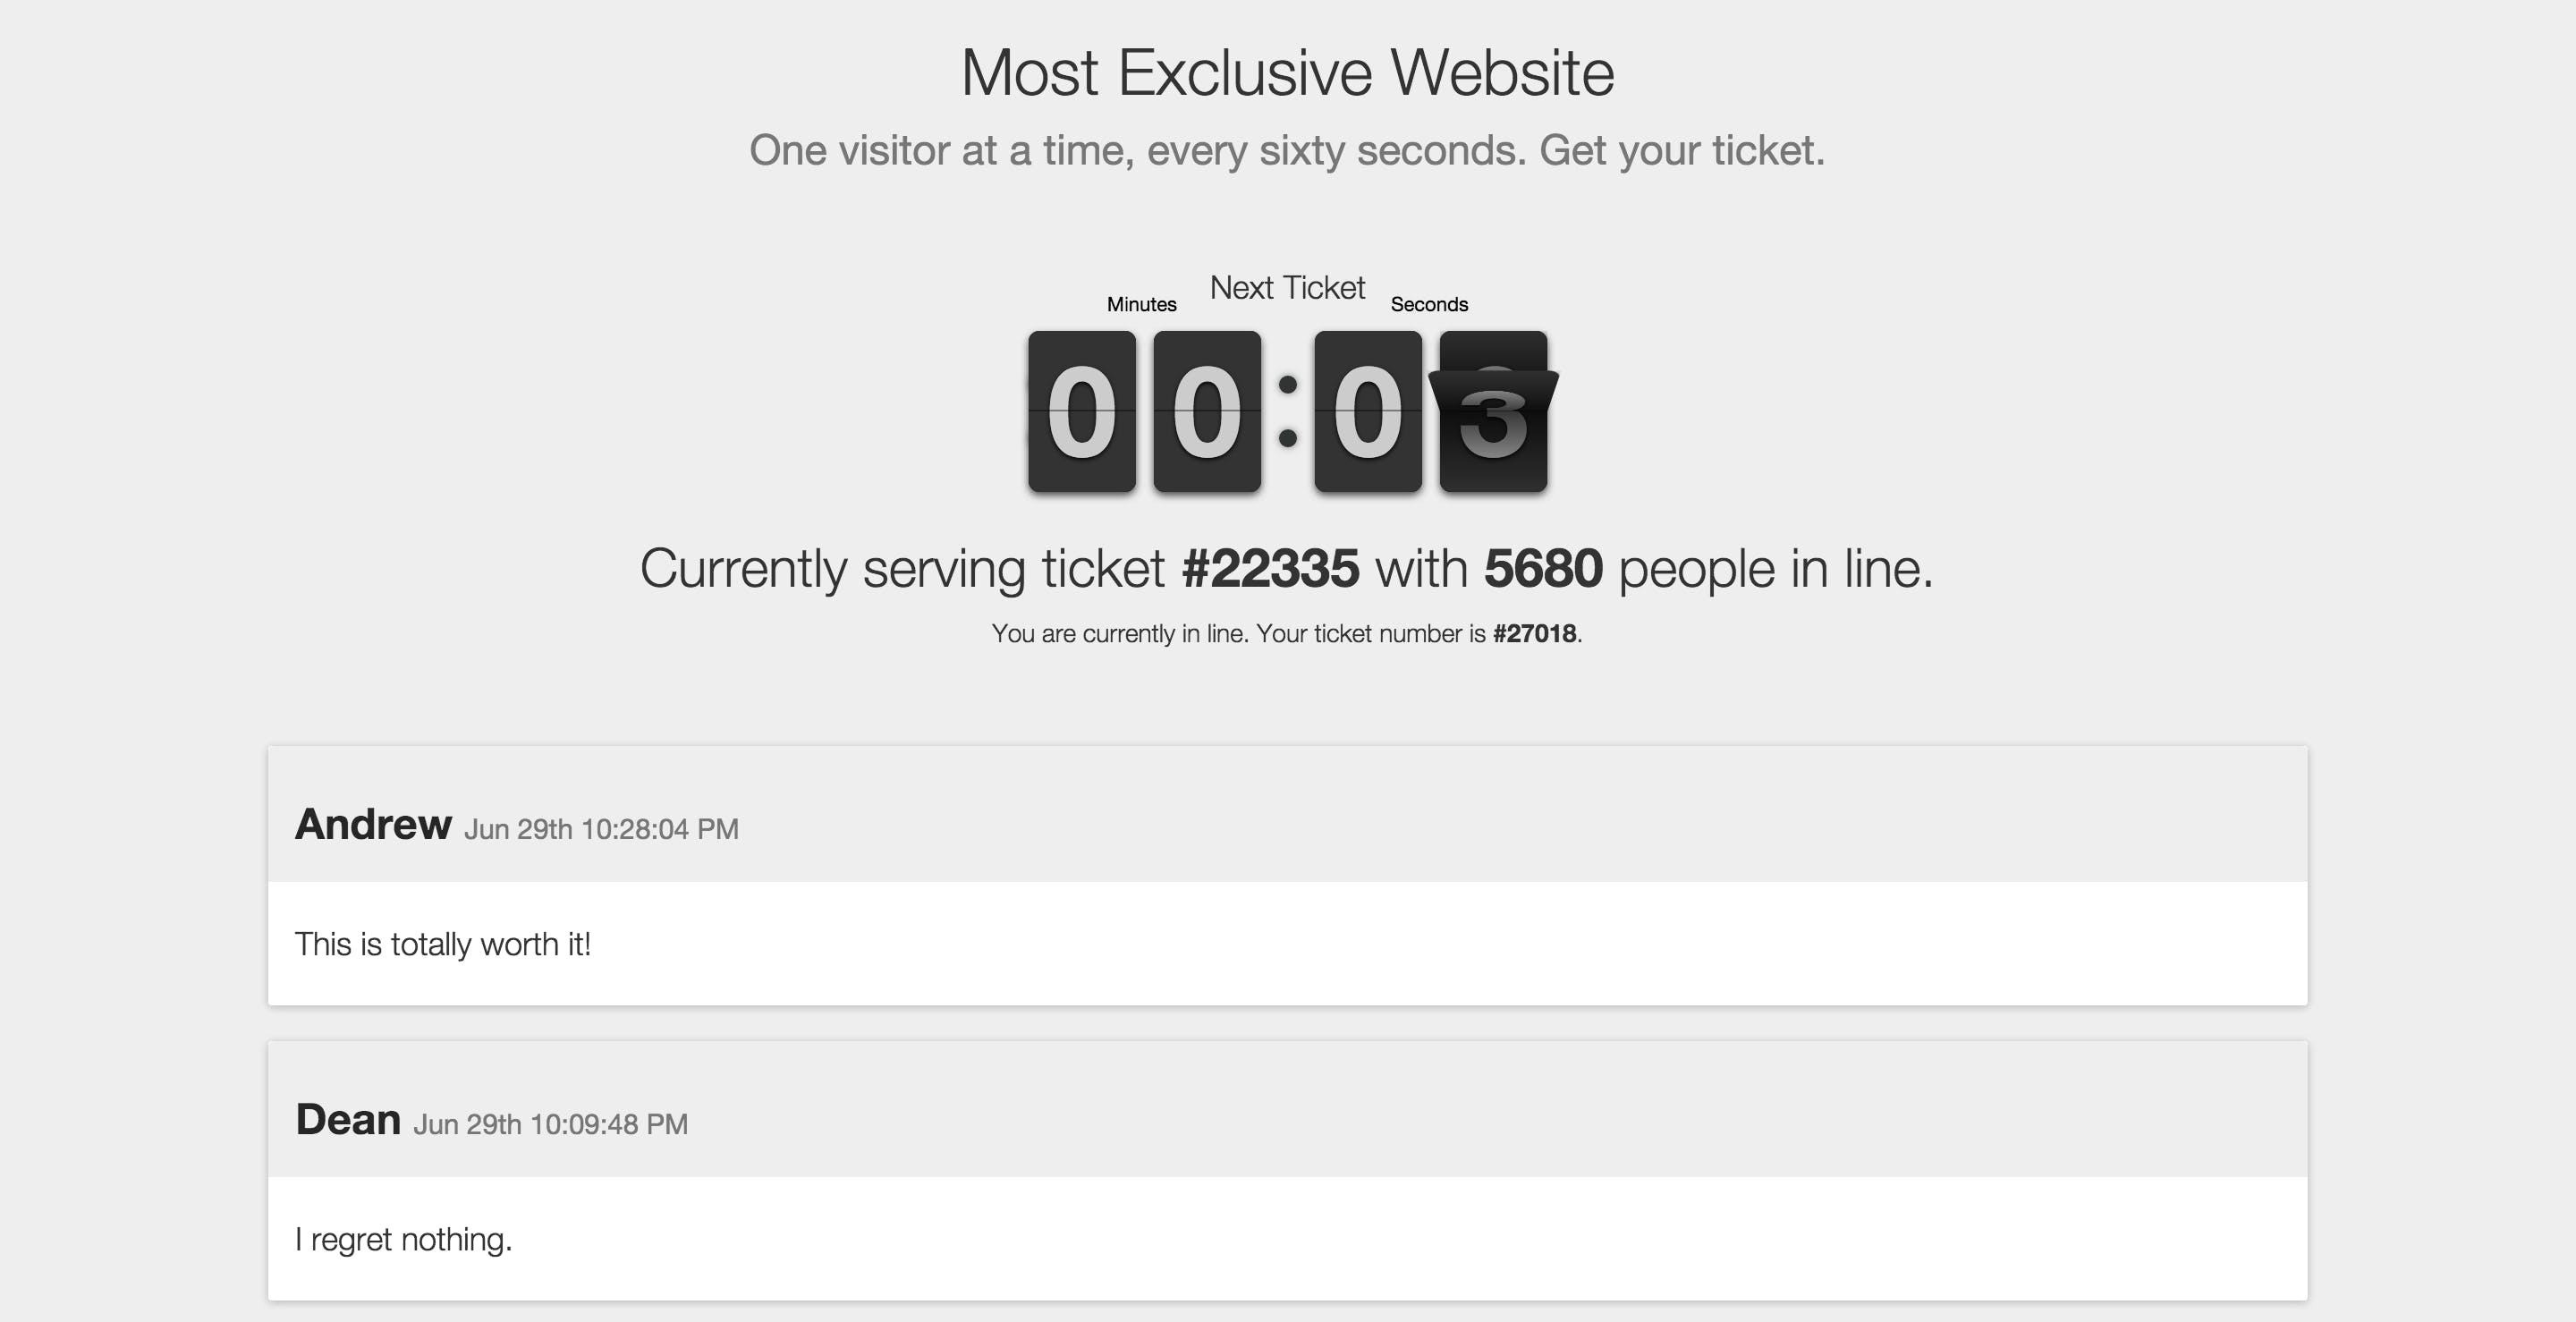 The Most Exclusive Website media 1